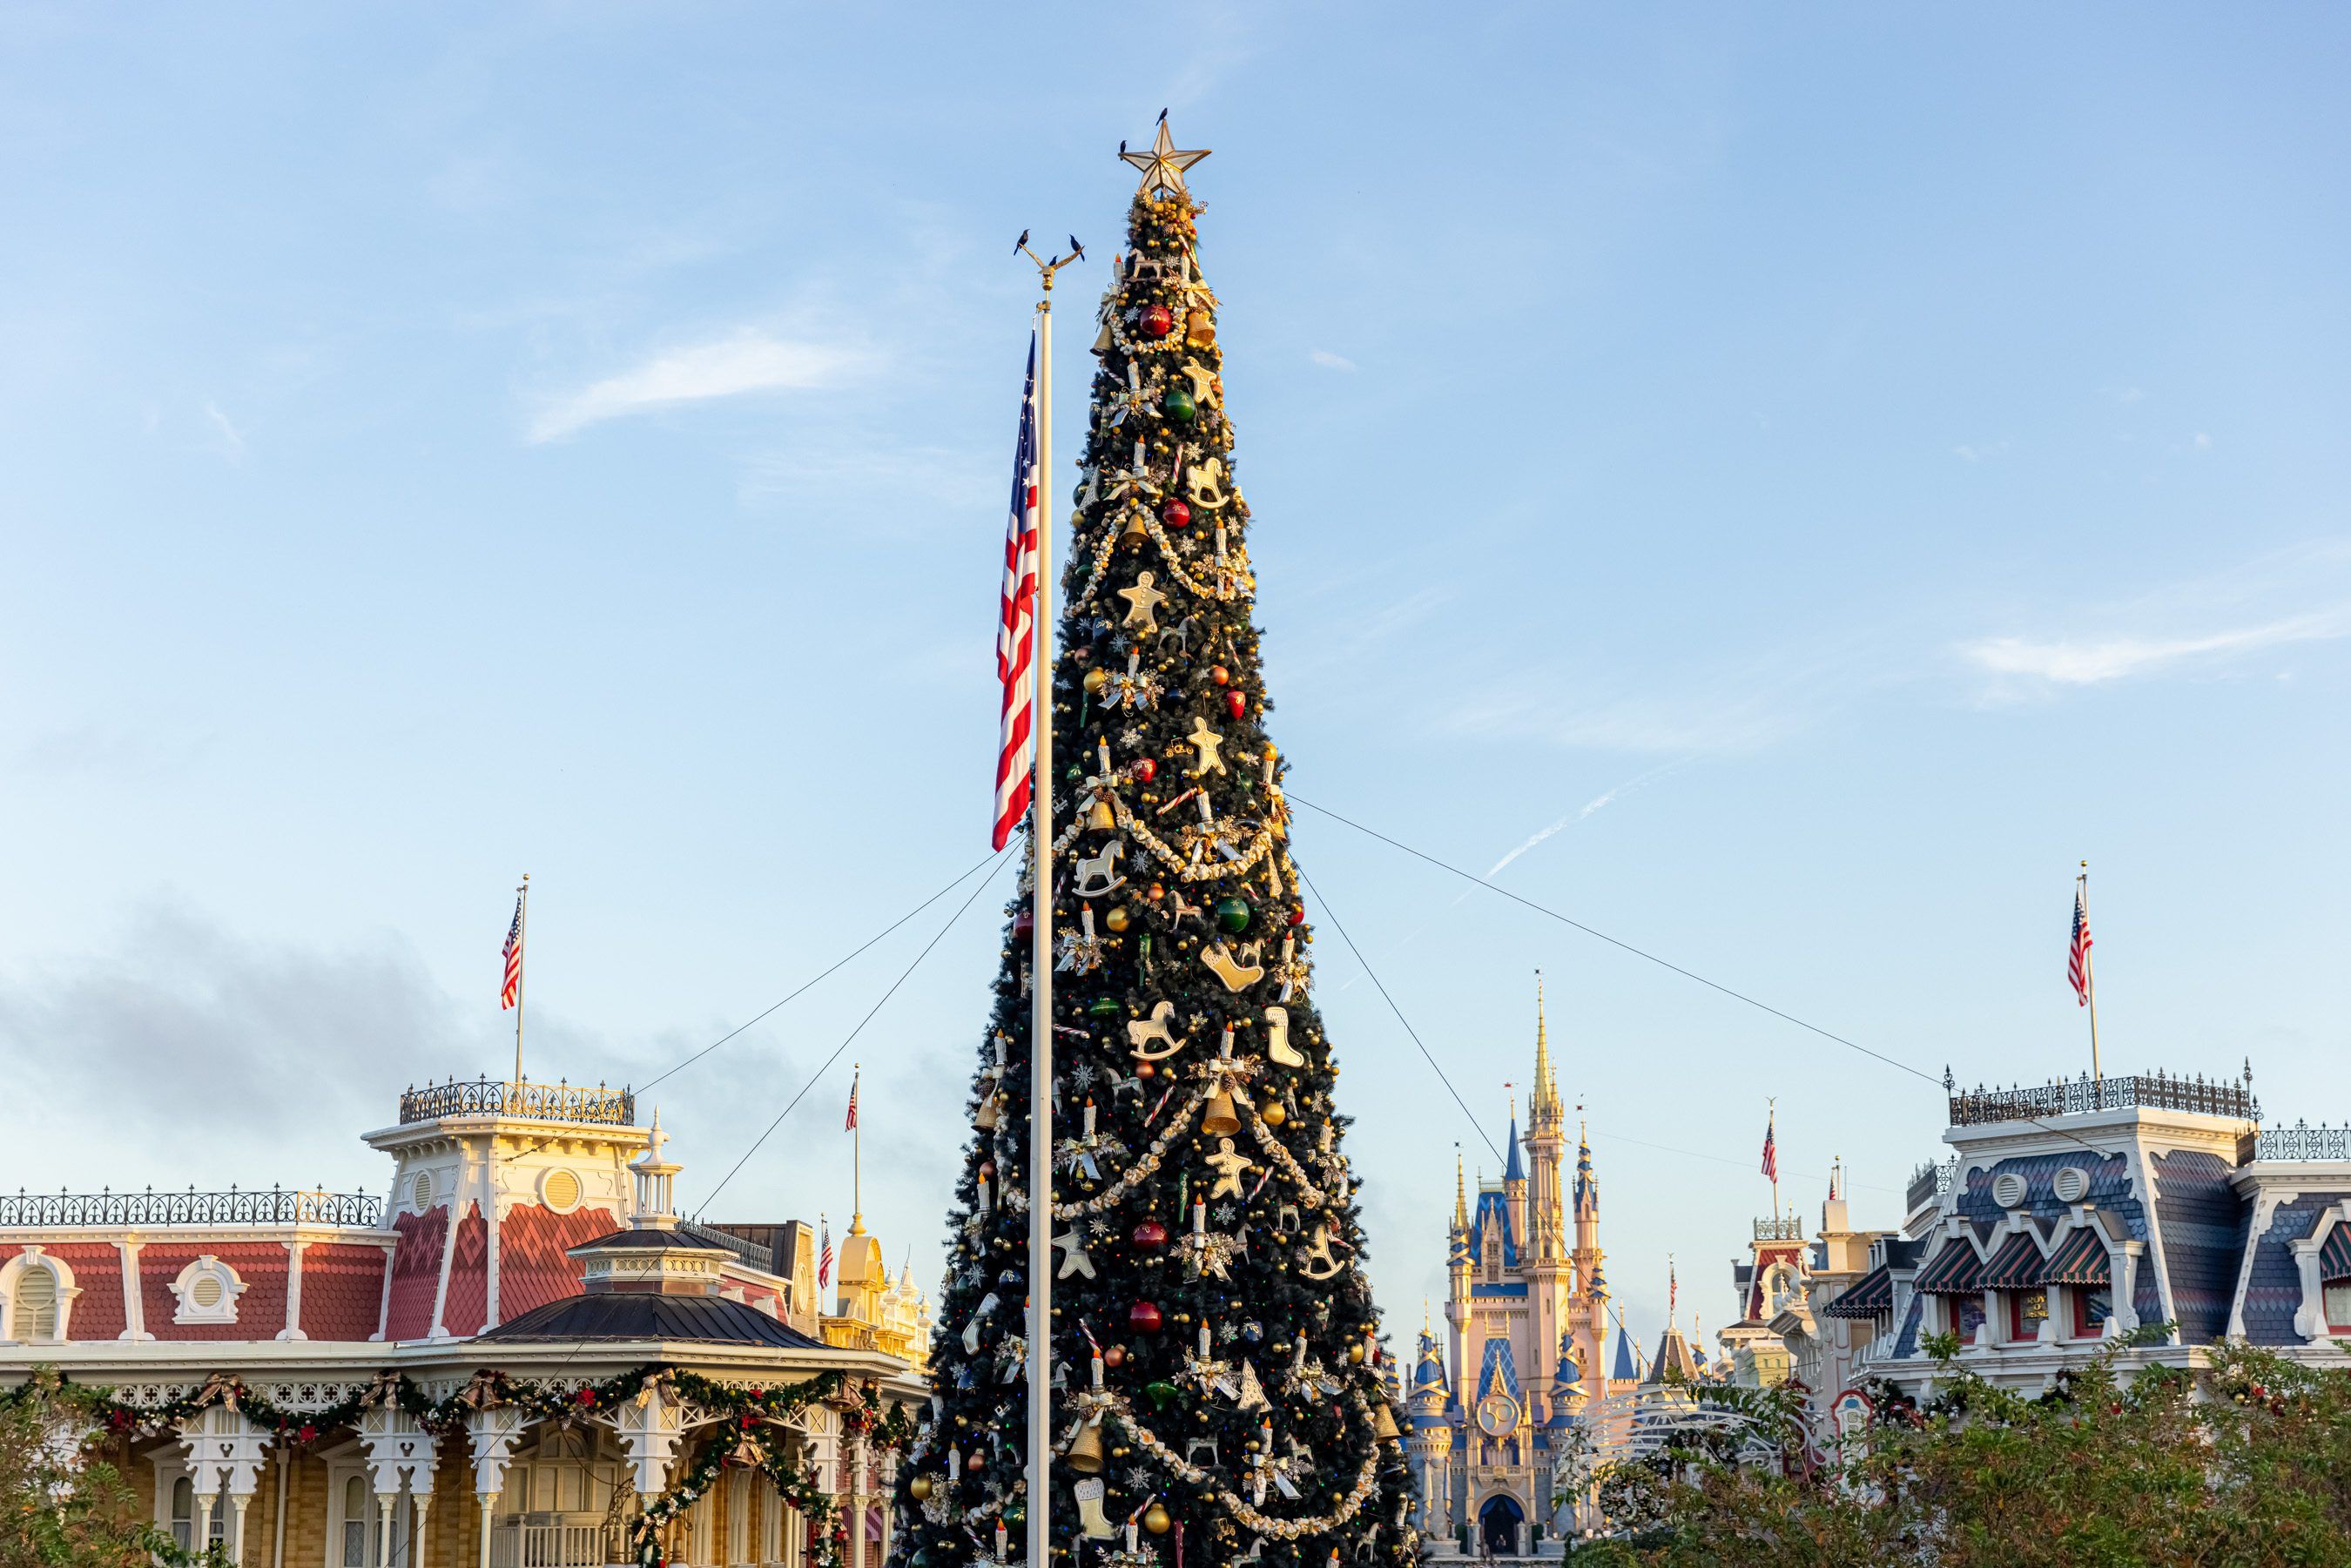 Christmas at Disney: find out what the festivities will be like in the land of Mickey